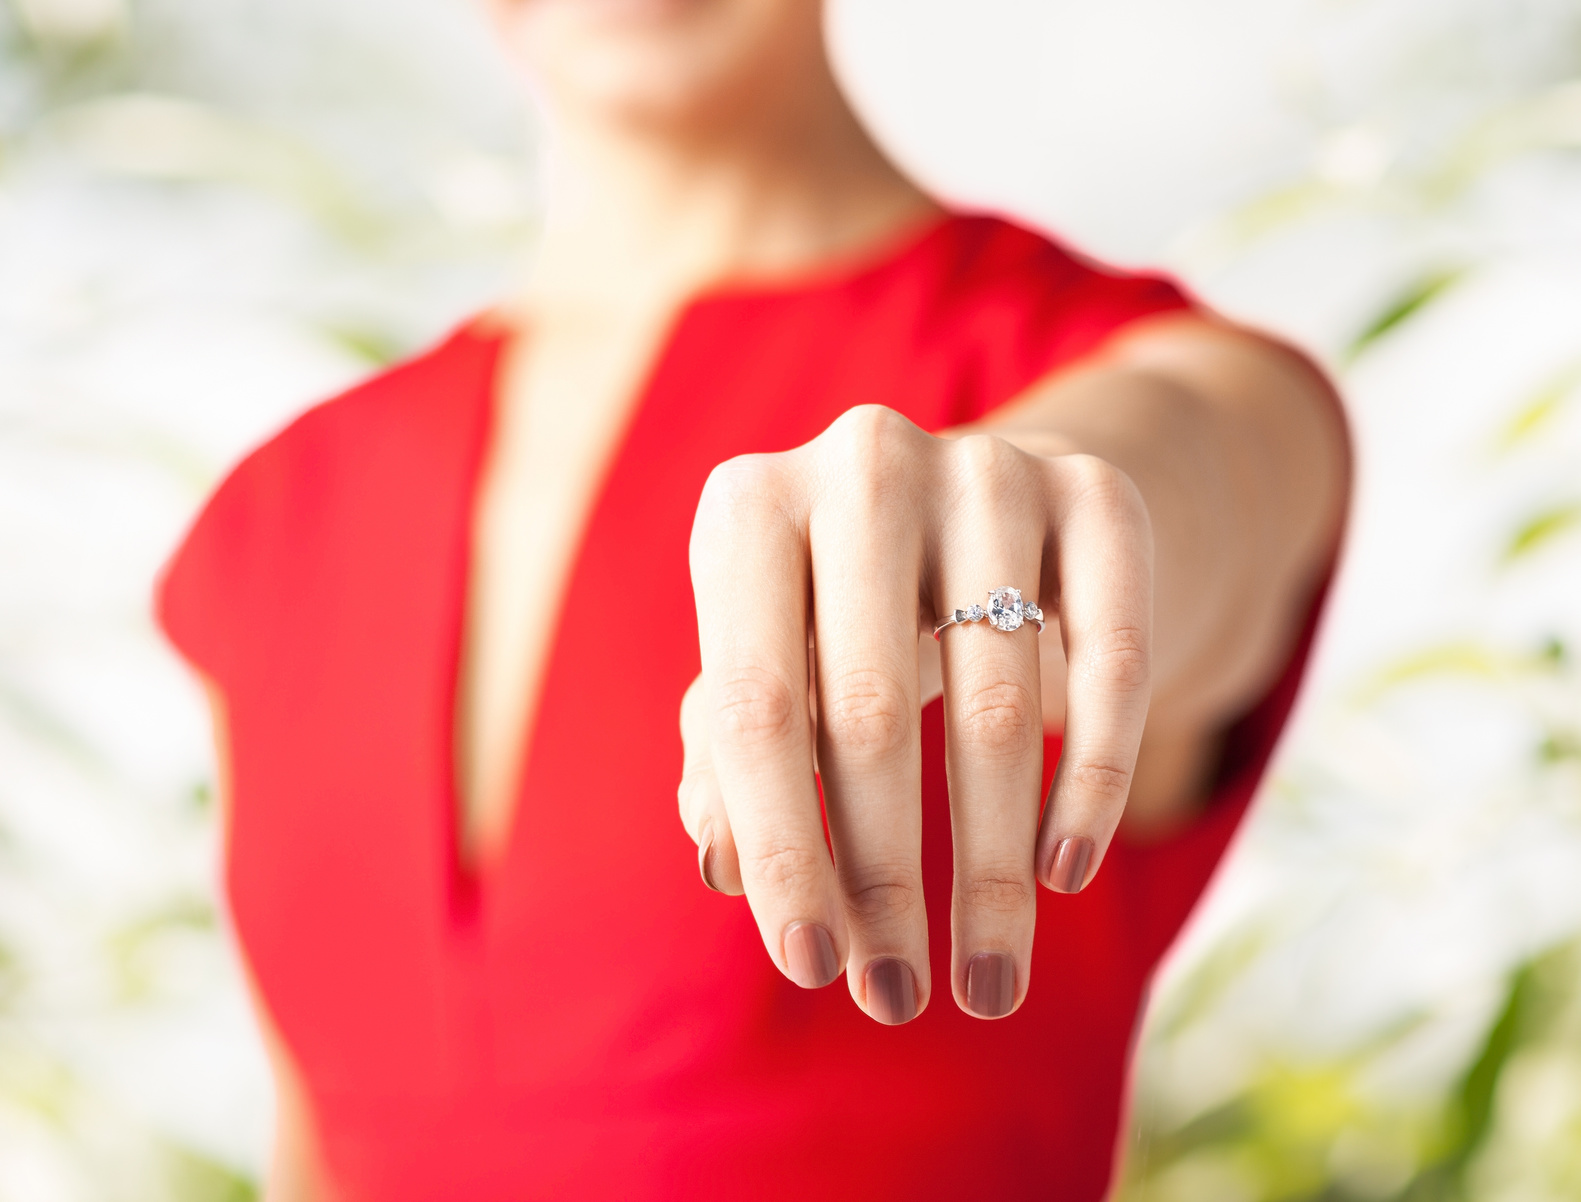 woman showing wedding ring on her hand